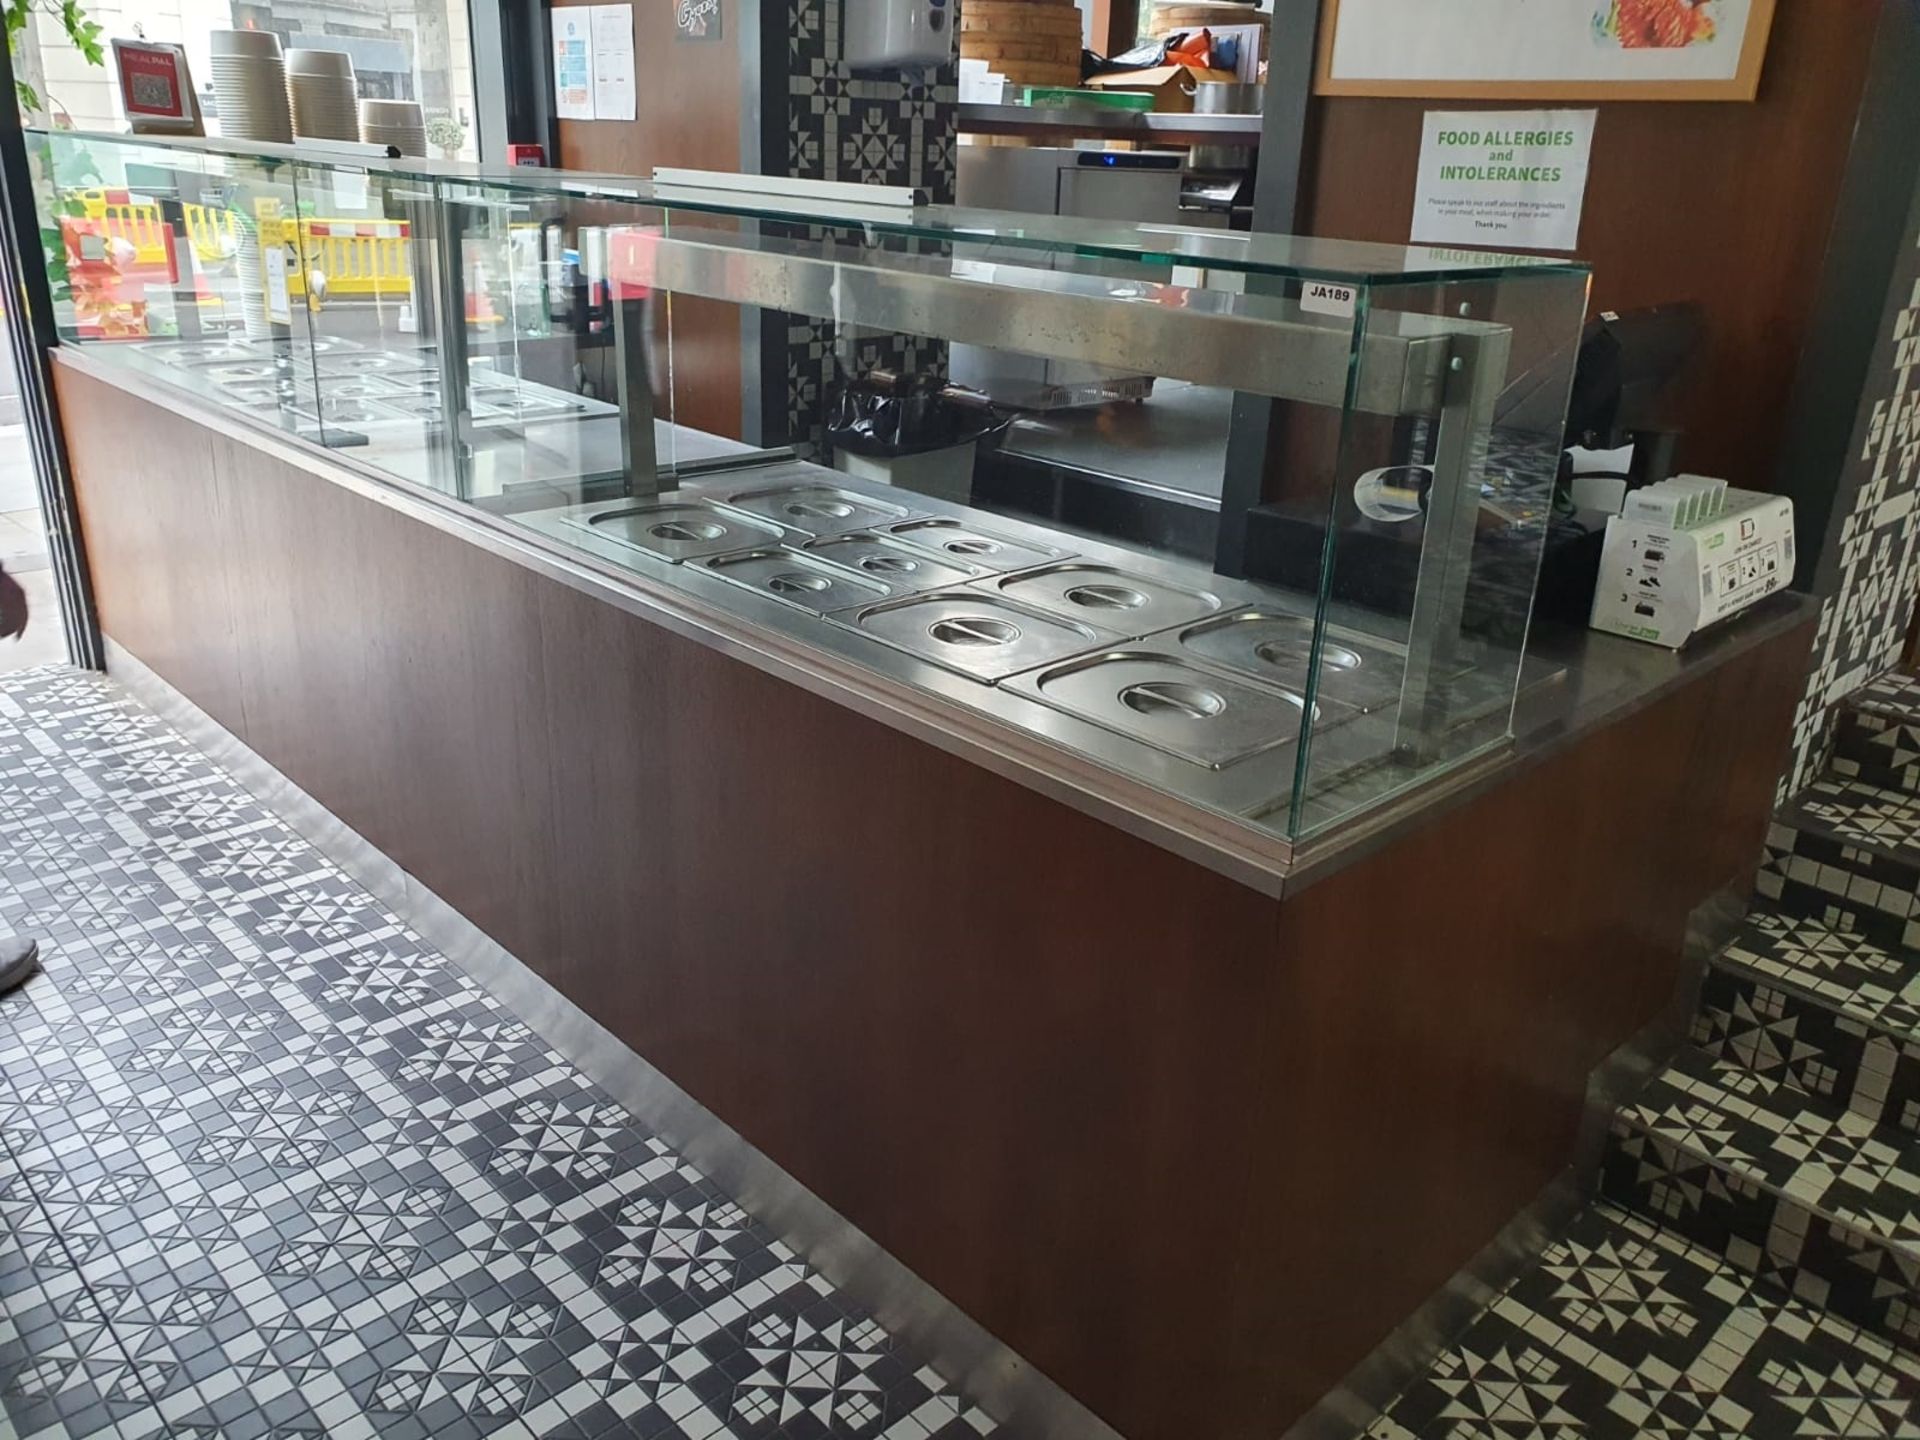 1 x Contemporary Restaurant Service Counter With Walnut Finish, Two Diamond Bain Marie Food - Image 19 of 25